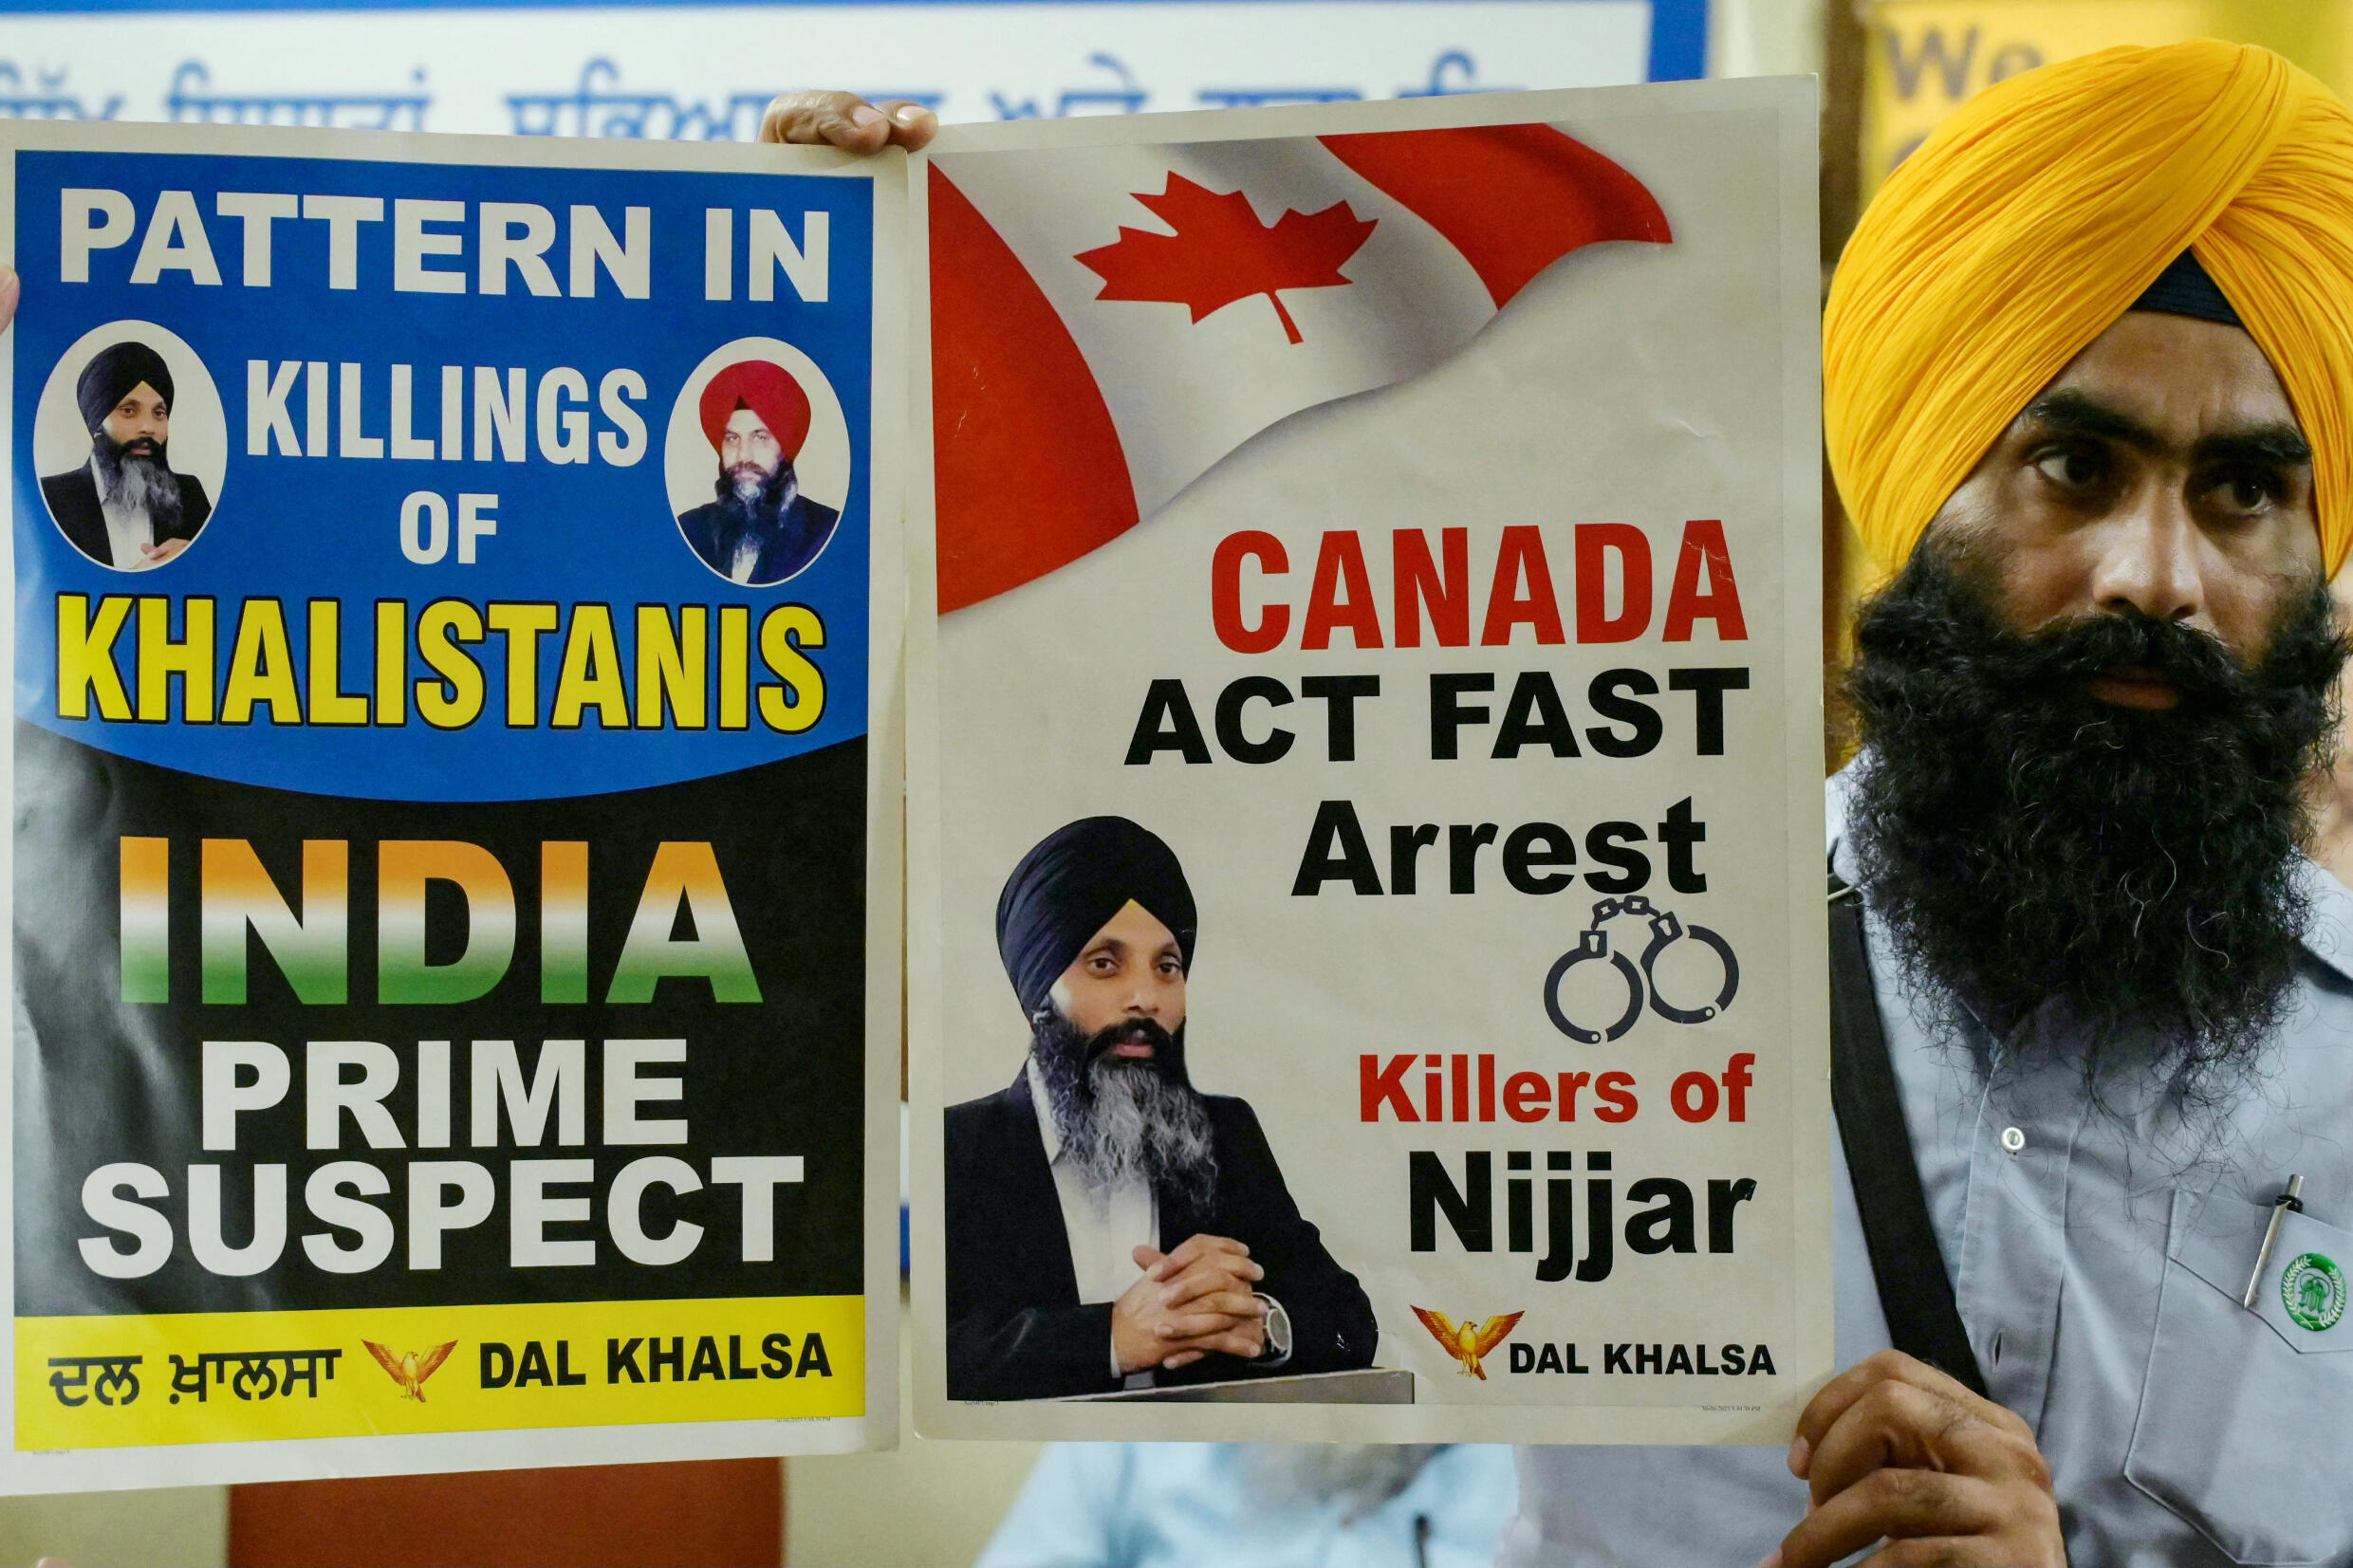 A member of a Sikh organization holds a banner with Sikh separatist Hardeep Singh Nijjar in Amritsar on September 22, 2023. Hardeep Singh Nijjar, an activist for the creation of an independent Sikh homeland called Khalistan, was wanted by Indian authorities for alleged terrorism and conspiracy to commit murder, and was shot dead by two masked assailants near Vancouver in June.